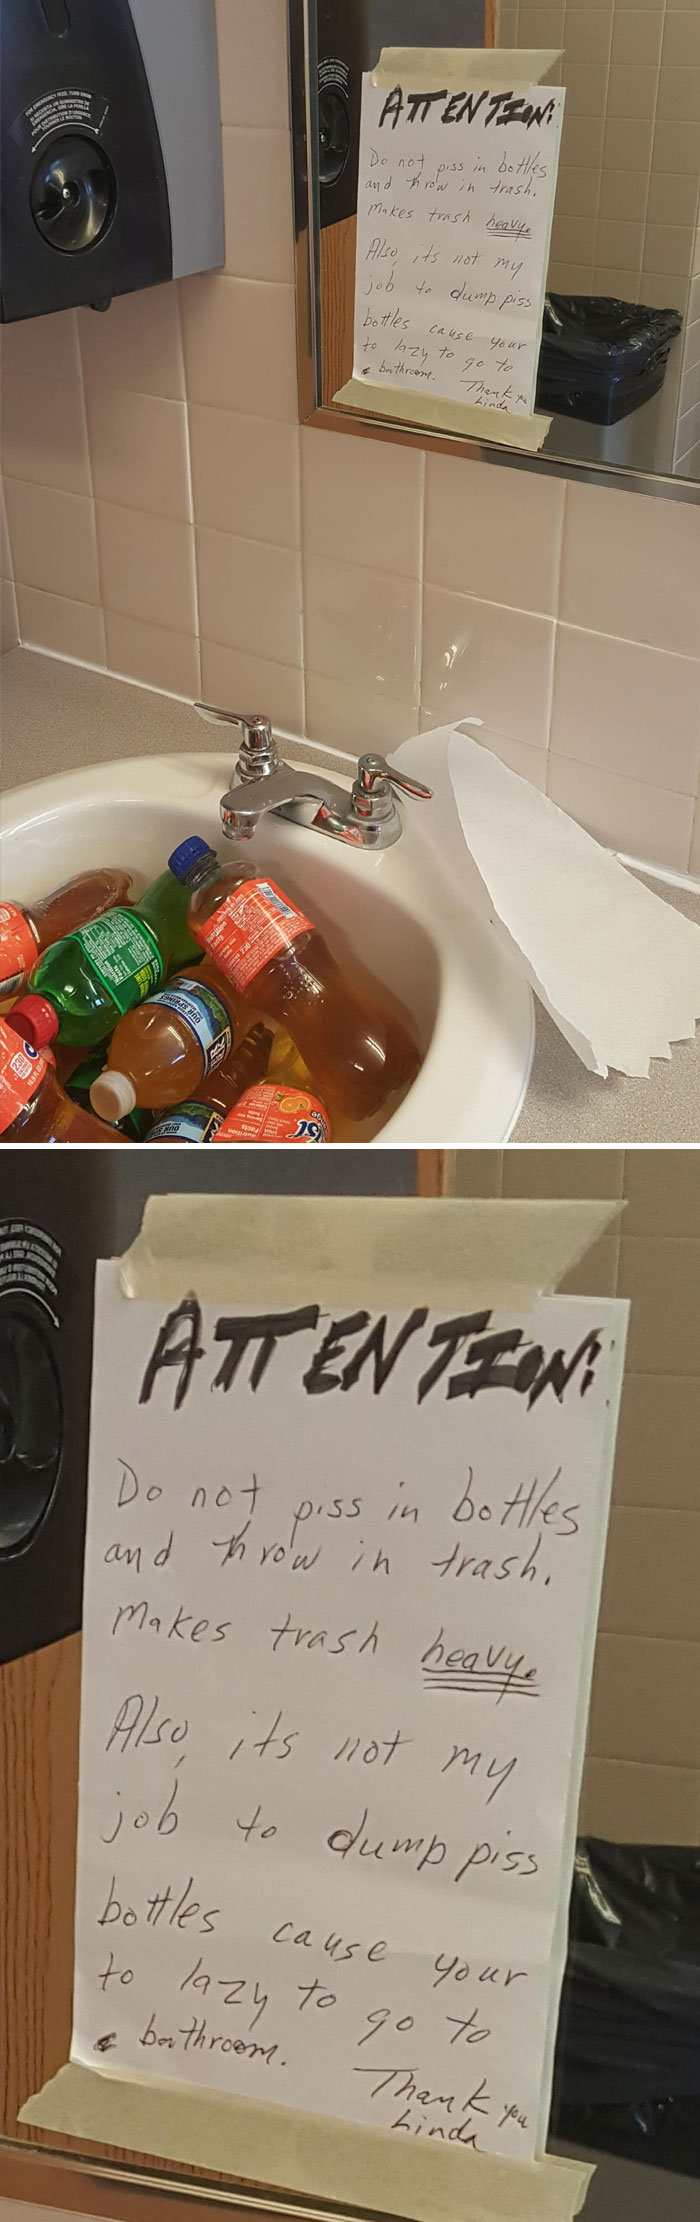 Do not piss in bottles and throw in trash, makes trash heavy Also, its not my job to dump piss bottles cause to lazy to go to your bathroom. Thank you hinda Attentiesini Do not piss in bottles and throw in trash, Makes trash heavy Als